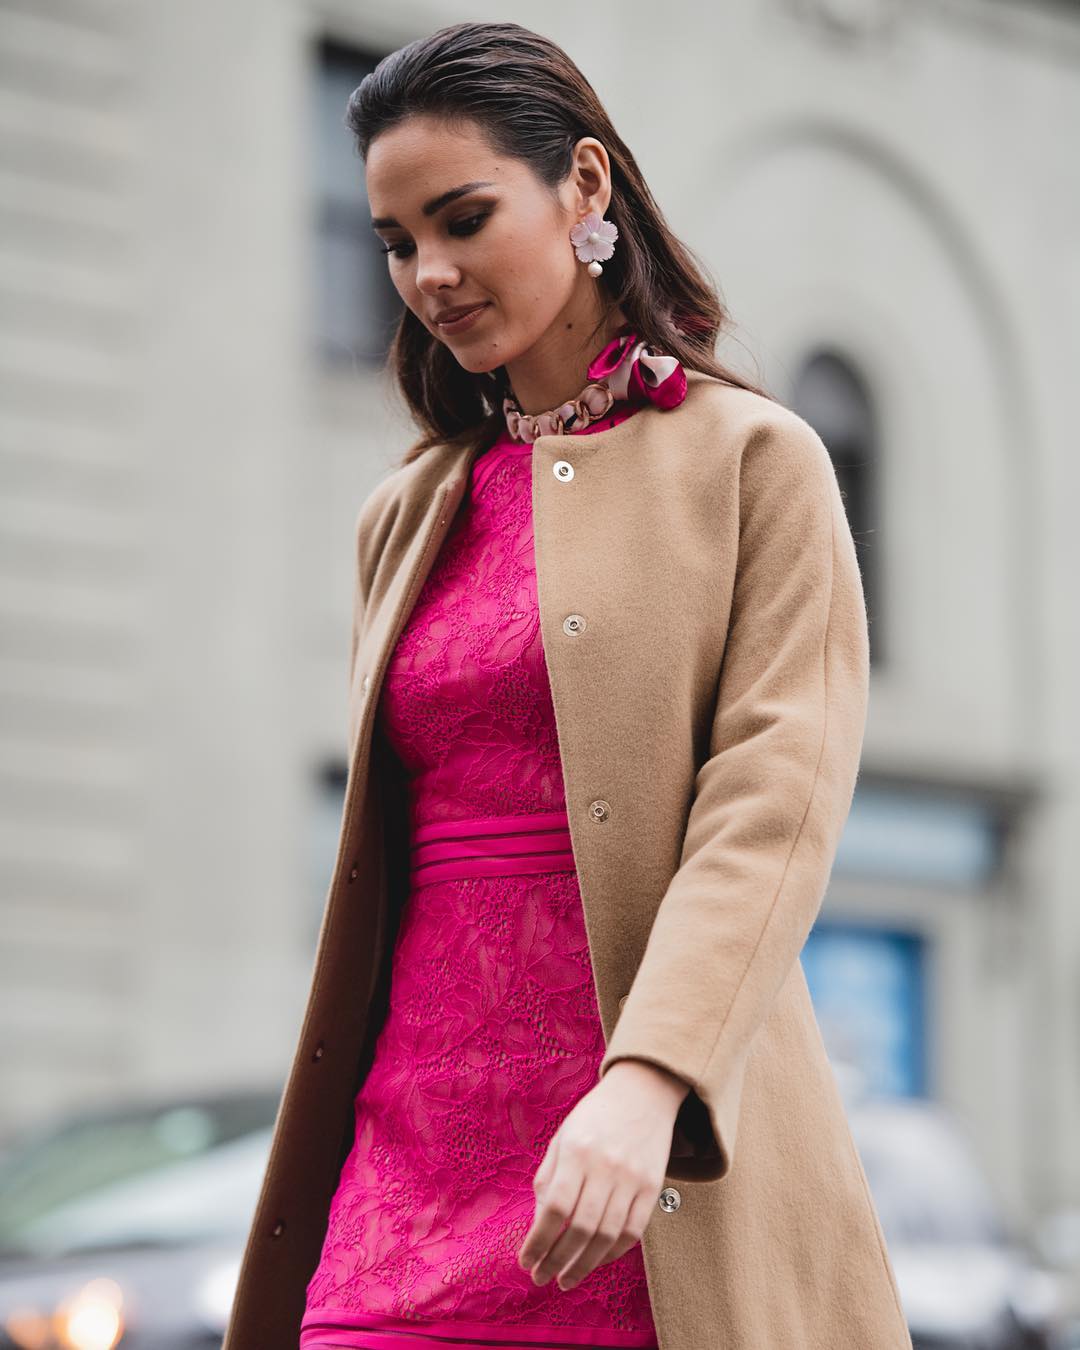 LOOK: Catriona Gray pretty in pink on first day of NY Fashion Week